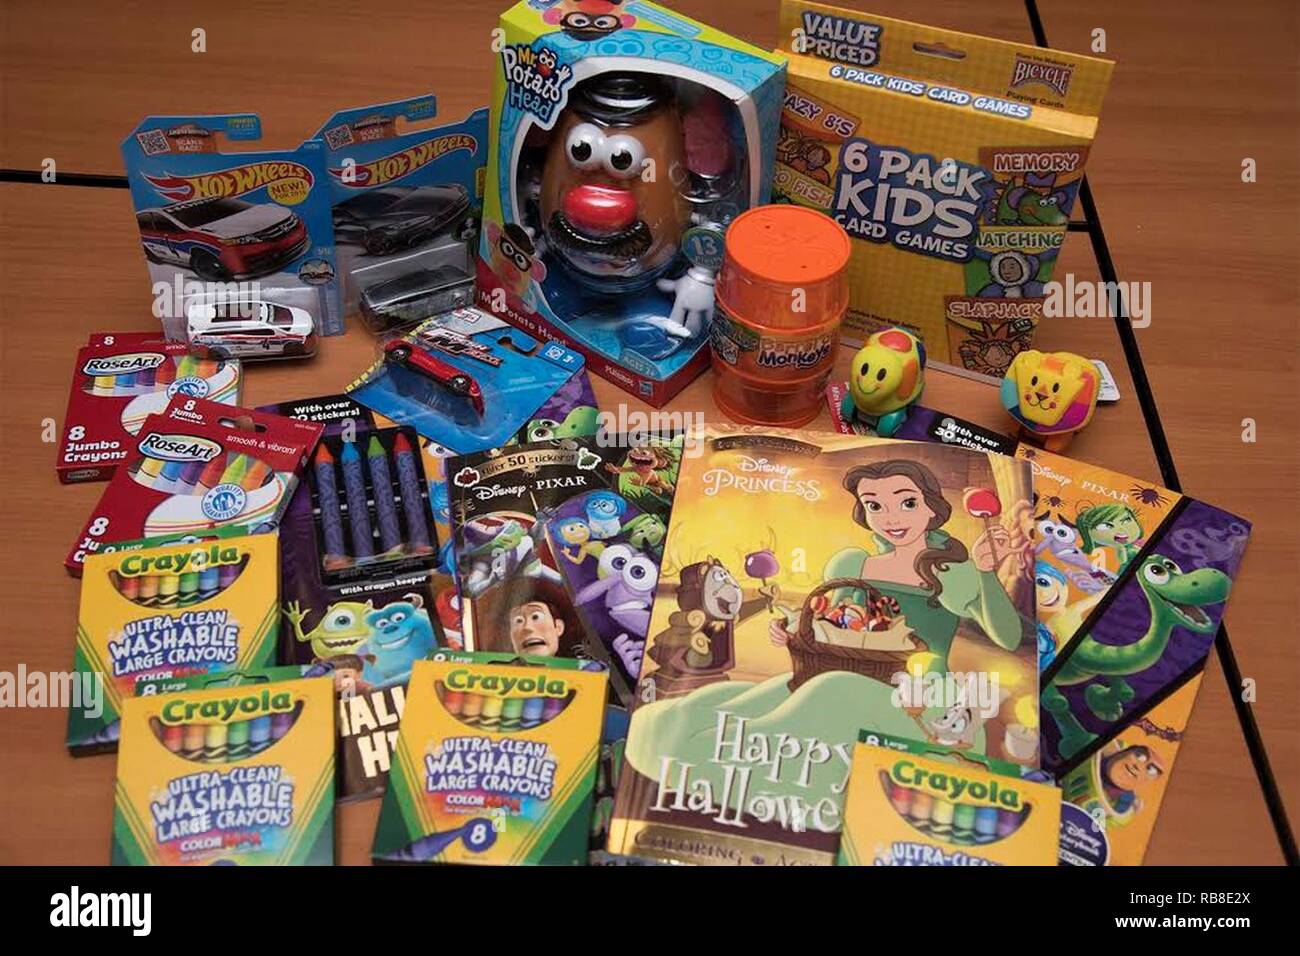 PETERSON AIR FORCE BASE, Colo. - The Peterson Air Force Base 5/6 Group is  collecting toys to go to children in the cancer ward at the Pediatric  Center for Cancer and Blood